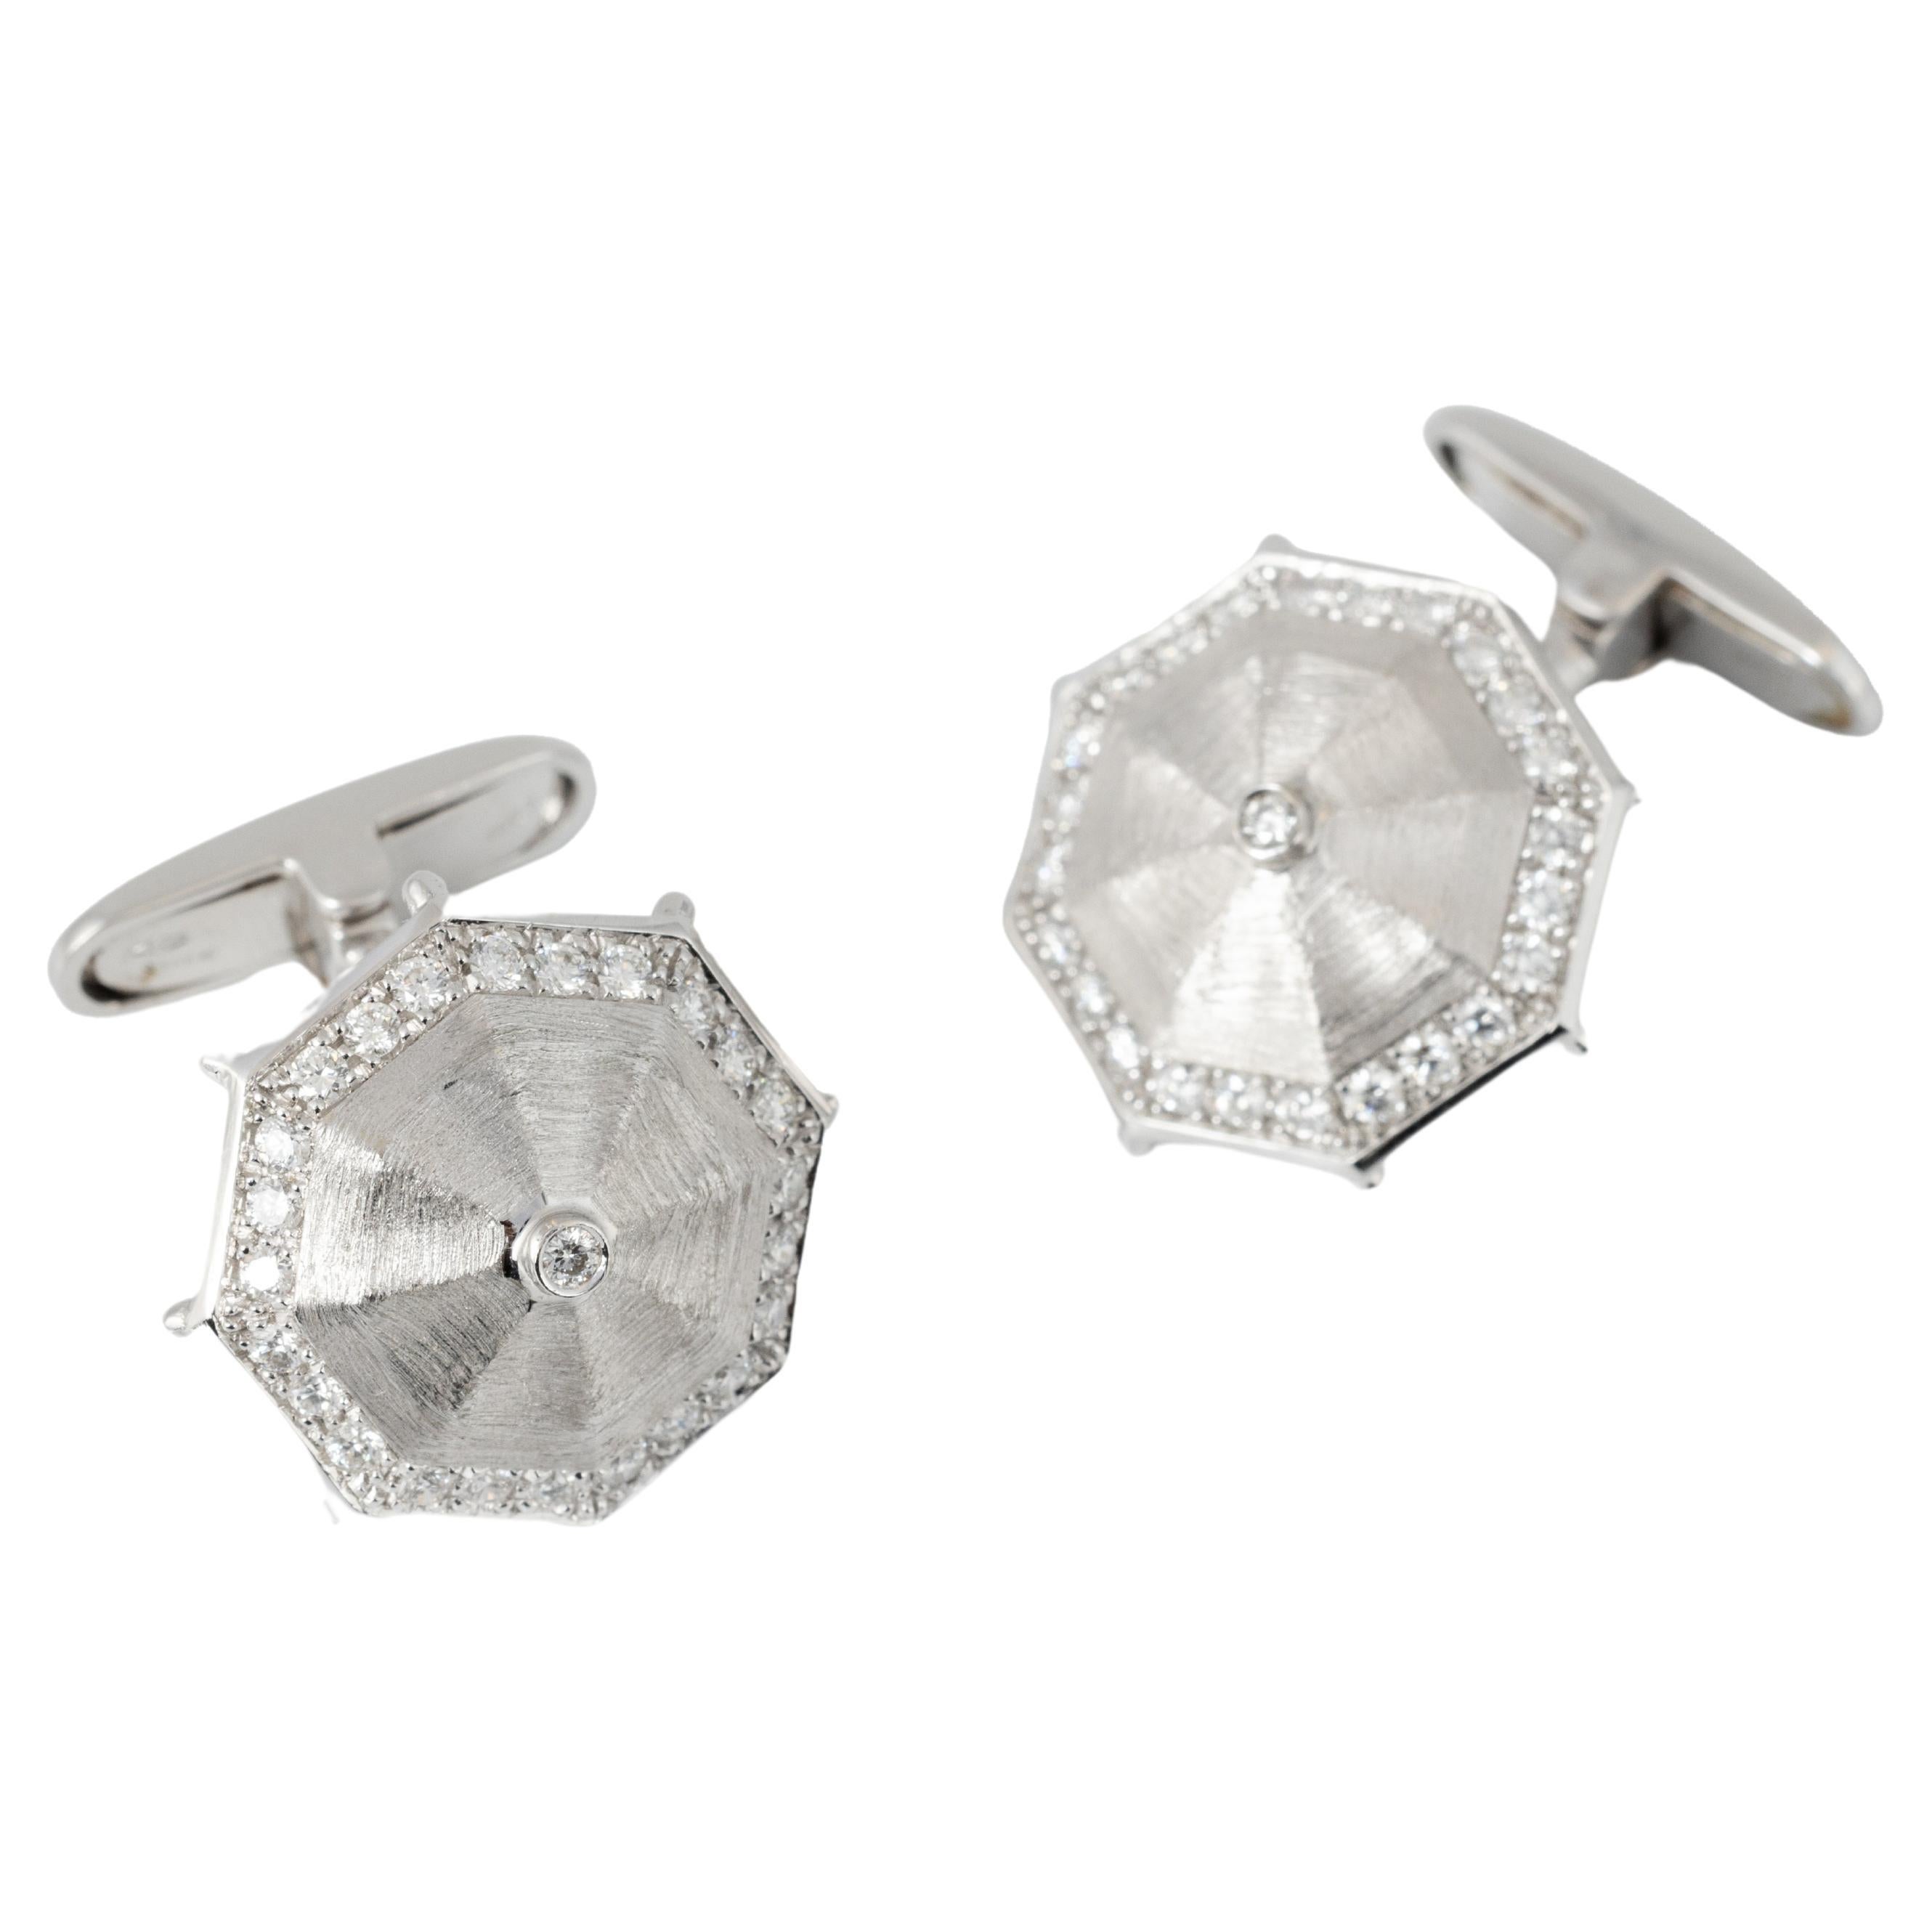 "Costis" Umbrella Collection Cufflinks WG with 0.73 carats Diamonds on the rim For Sale